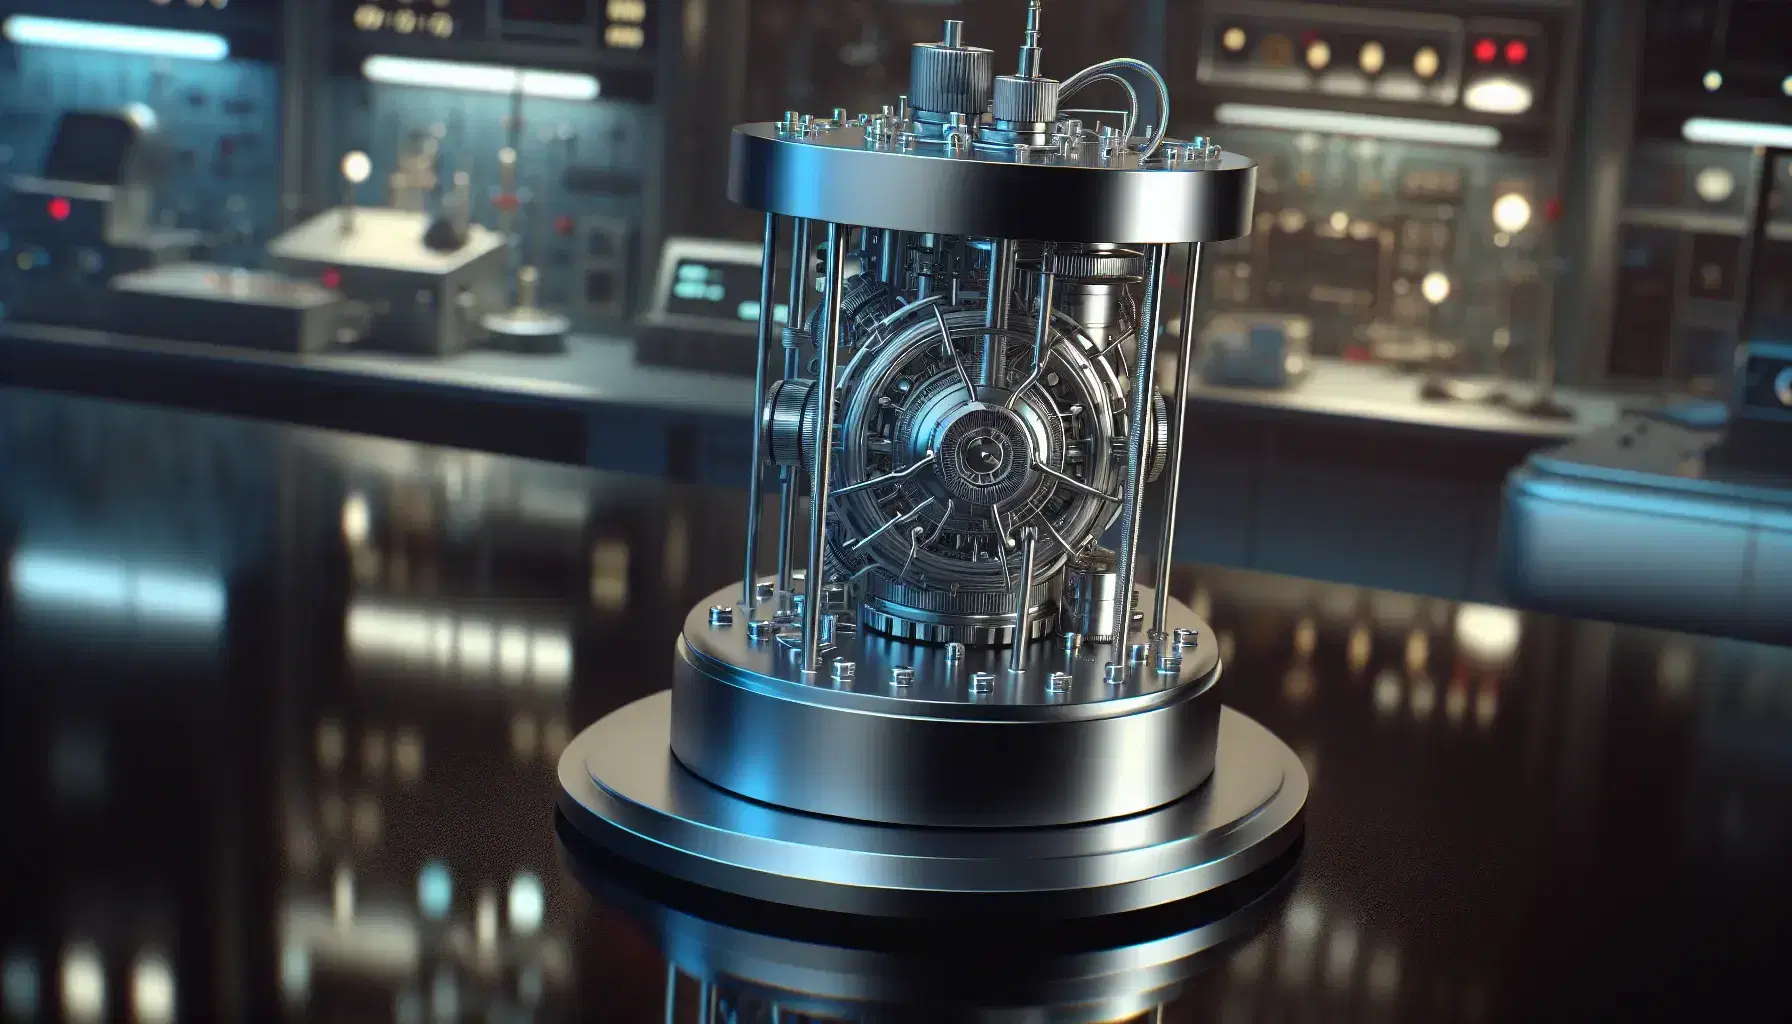 Modern atomic clock with cylindrical core and metallic components on a reflective black surface, set against a blurred laboratory backdrop.